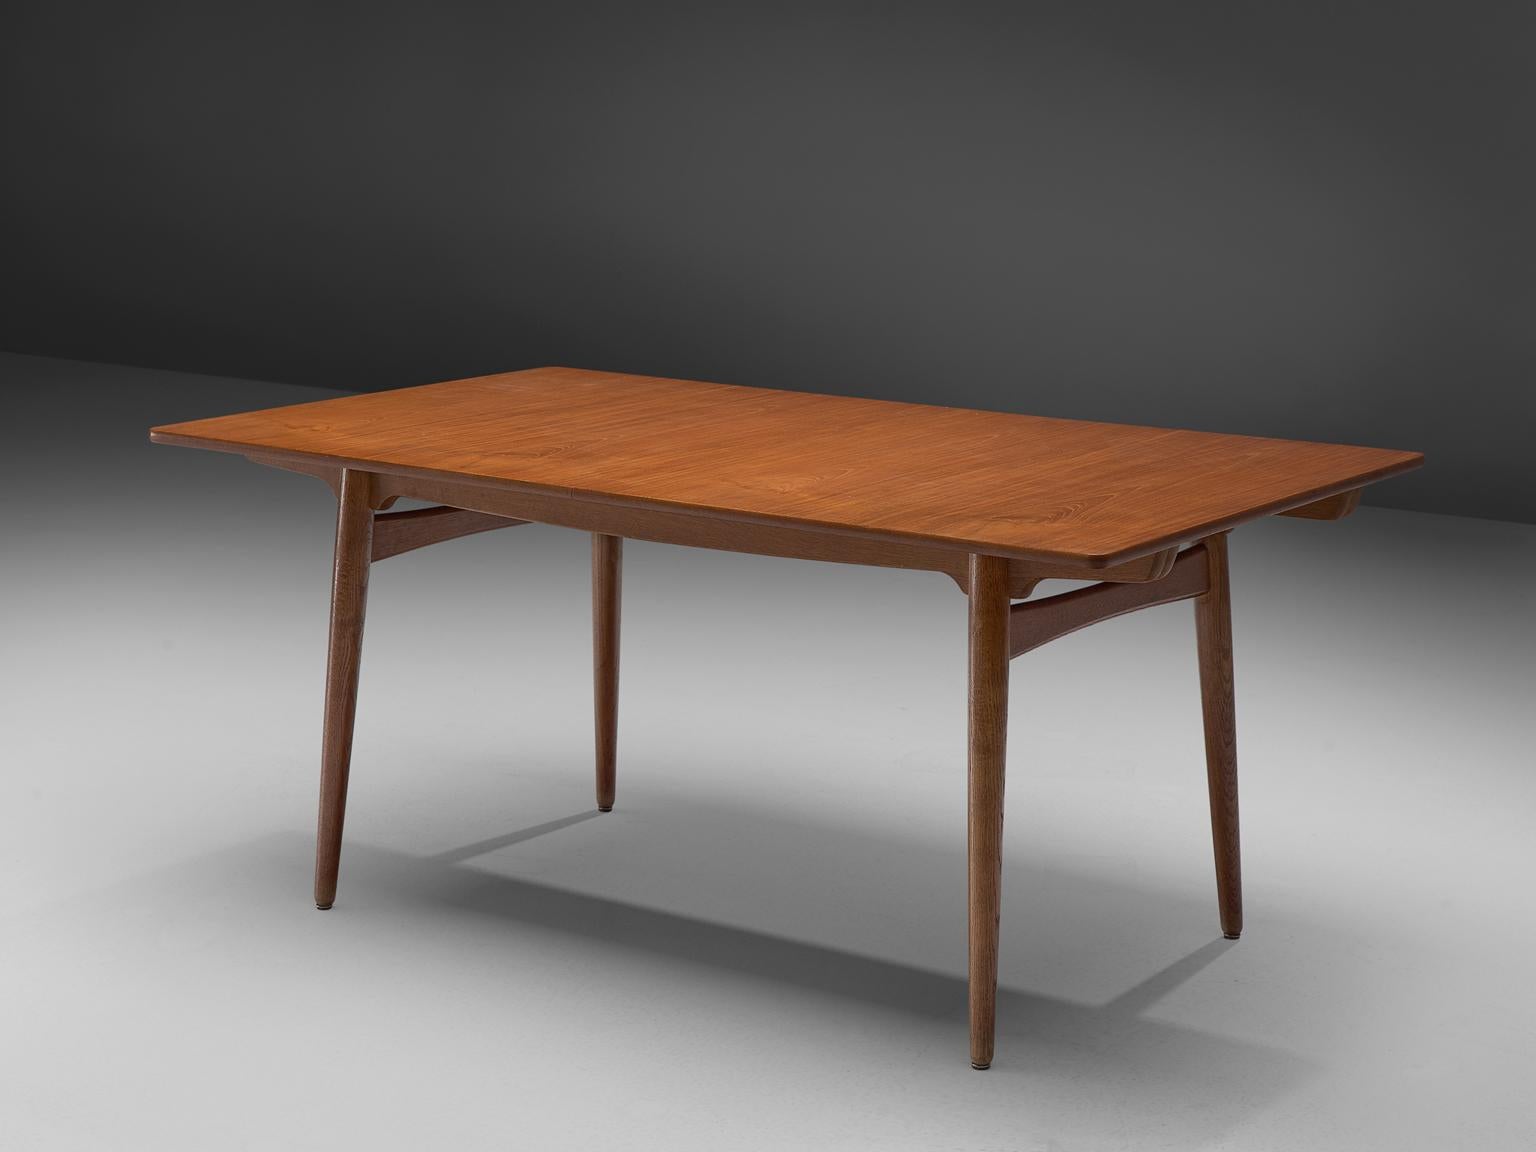 Hans J. Wegner for Andreas Tuck, 'AT-310', teak and oak, Denmark, 1950s.

This extendable AT-310 dining table designed by Hans J. Wegner is made with a teak top and has extra leaves in order to expand the piece from a six-seat (160cm) to a ten-seat